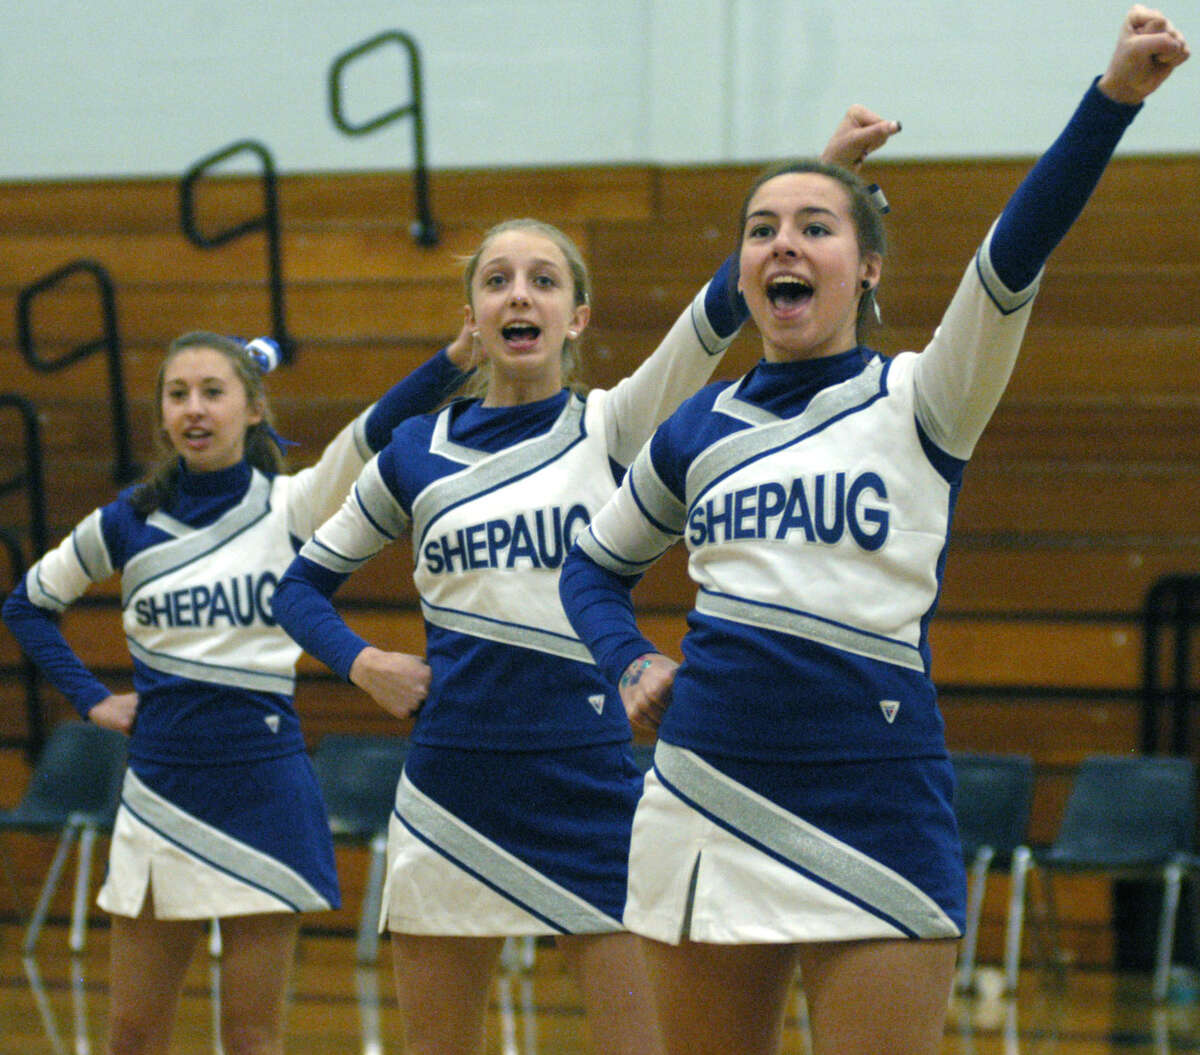 Go, Spartans! Shepaug Valley High cheerleaders, above, from left to right, Emma DelVecchio, Kaitlyn Smith and Bria Noone, fire up the crowd at Shepaug Valley High School boys' basketball's game vs. Gilbert, Jan. 18, 2013 in Washington. The girls lend vocal and emotional support to the Spartan boys' and girls' basketball teams during their home games. Contributing their talents are, right photo, from left to right, front row, Kayley Bresson, Bria Noone and Claire Caco; back row, Emma DelVecchio, Kaitlyn Smith and Lyndsey DelVecchio.